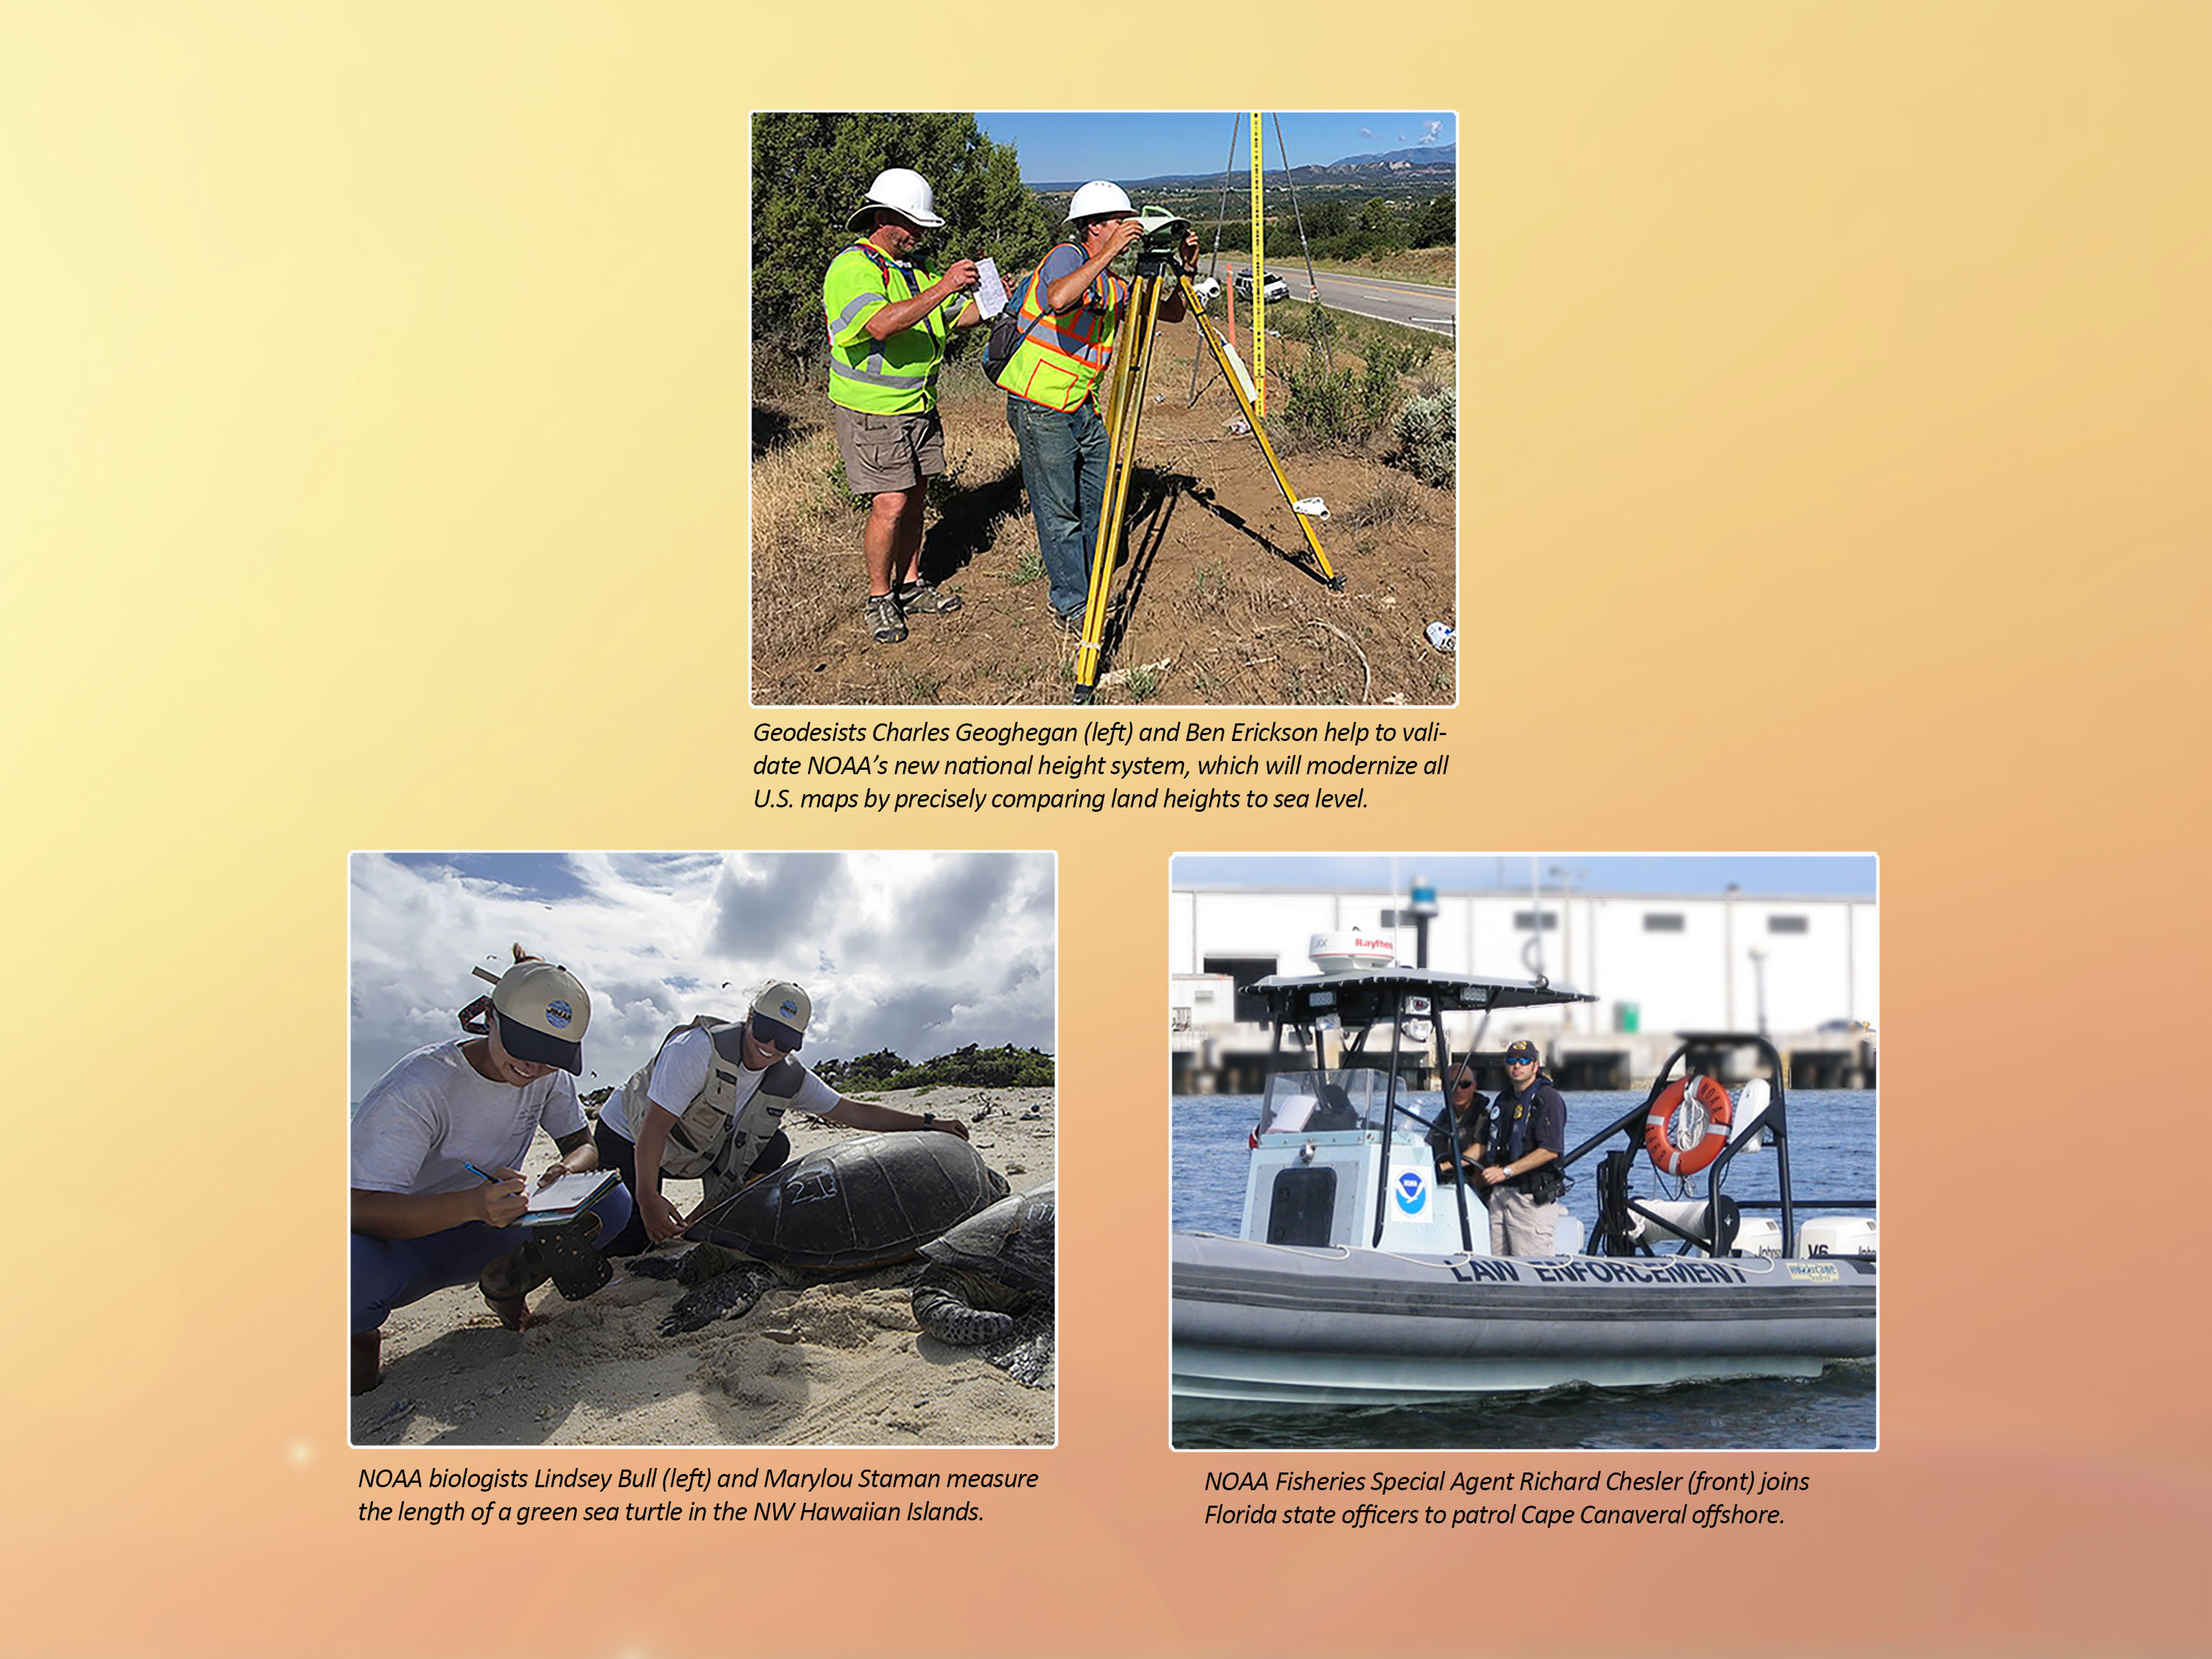 Three examples of NOAA staff working in the heat.